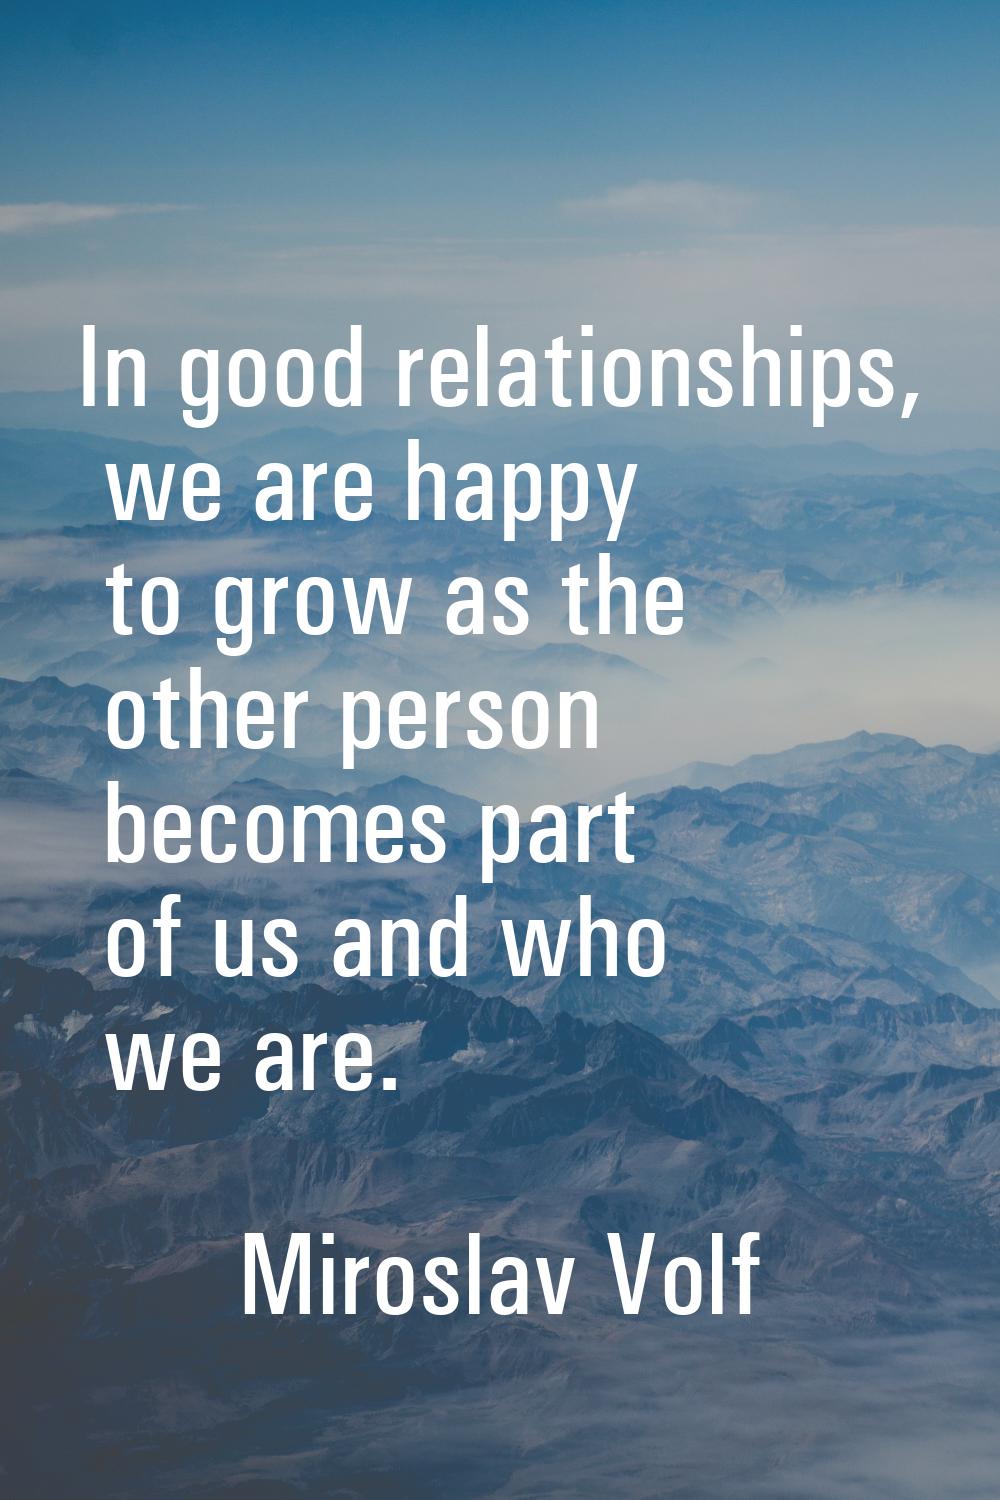 In good relationships, we are happy to grow as the other person becomes part of us and who we are.